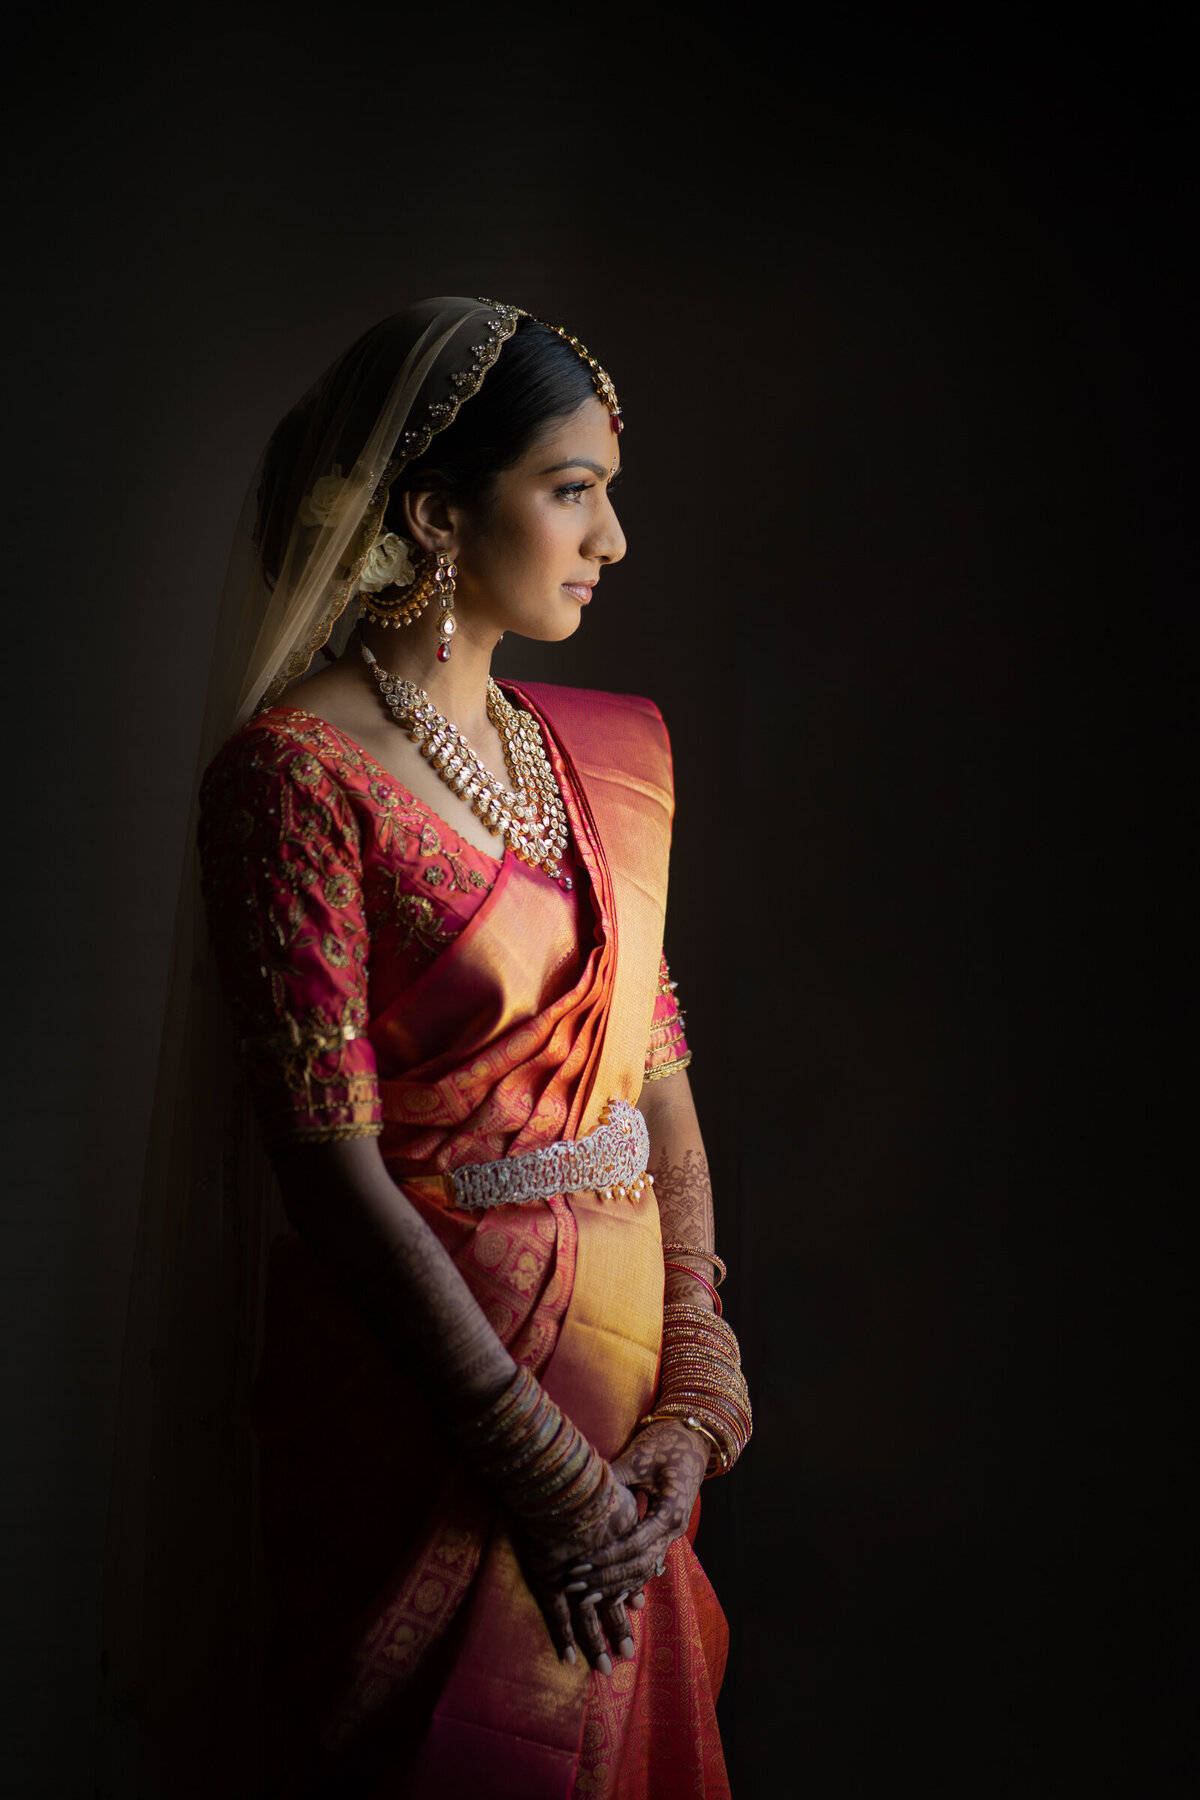 A bride in traditional Indian clothes looking off to the side.